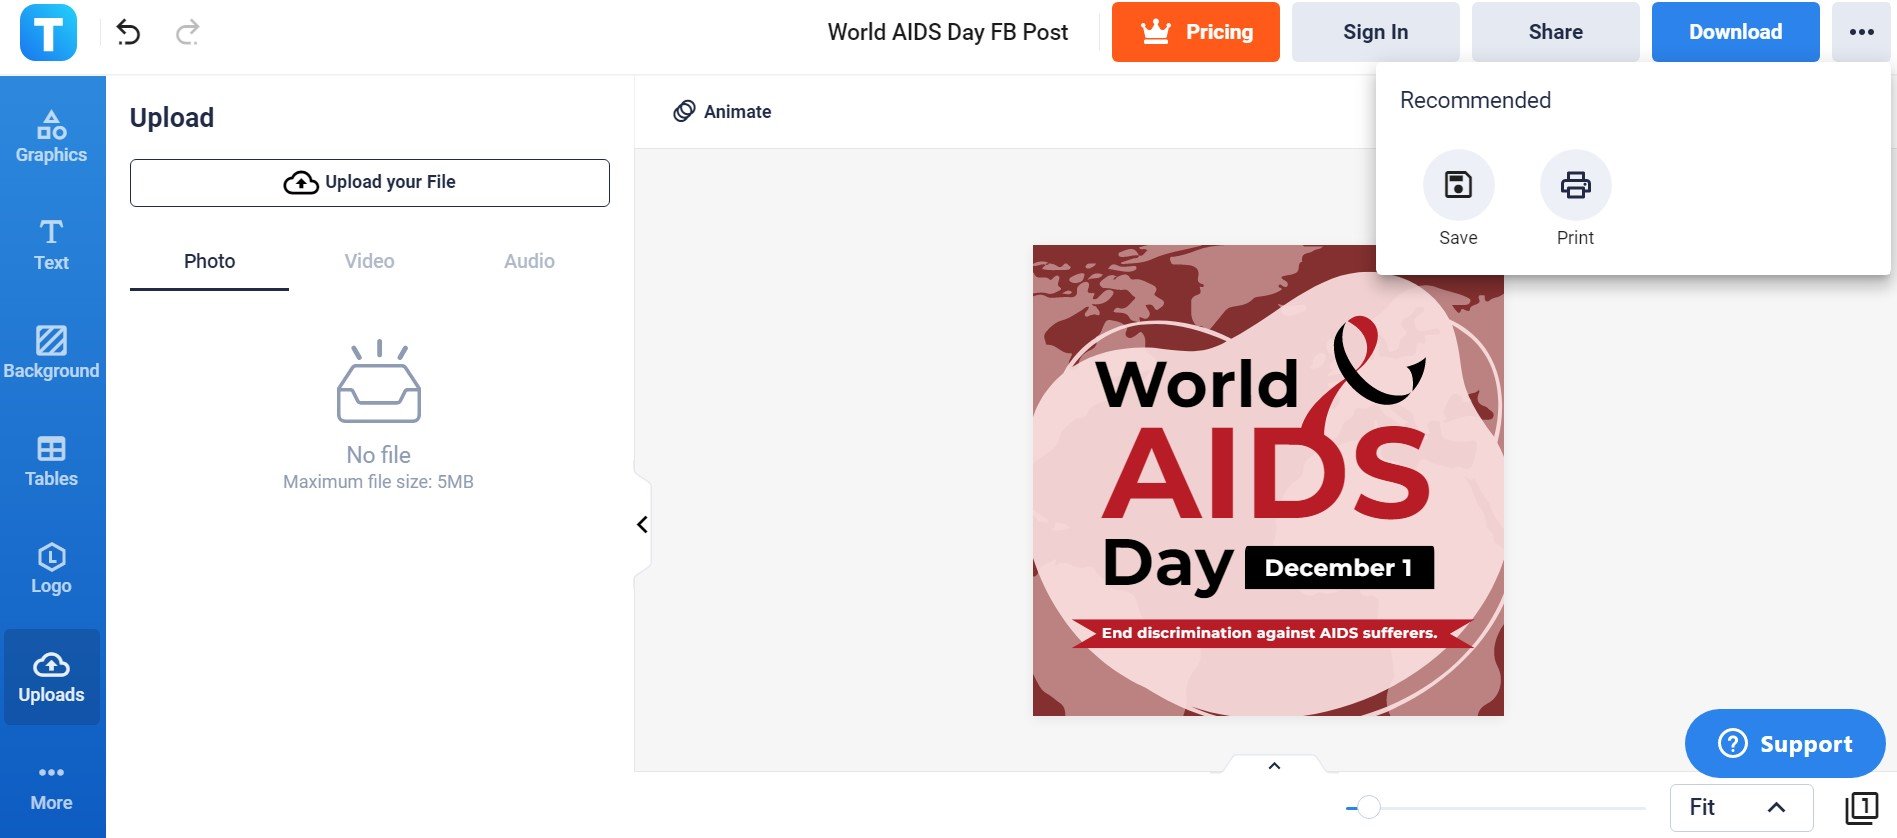 save the world aids day fb post